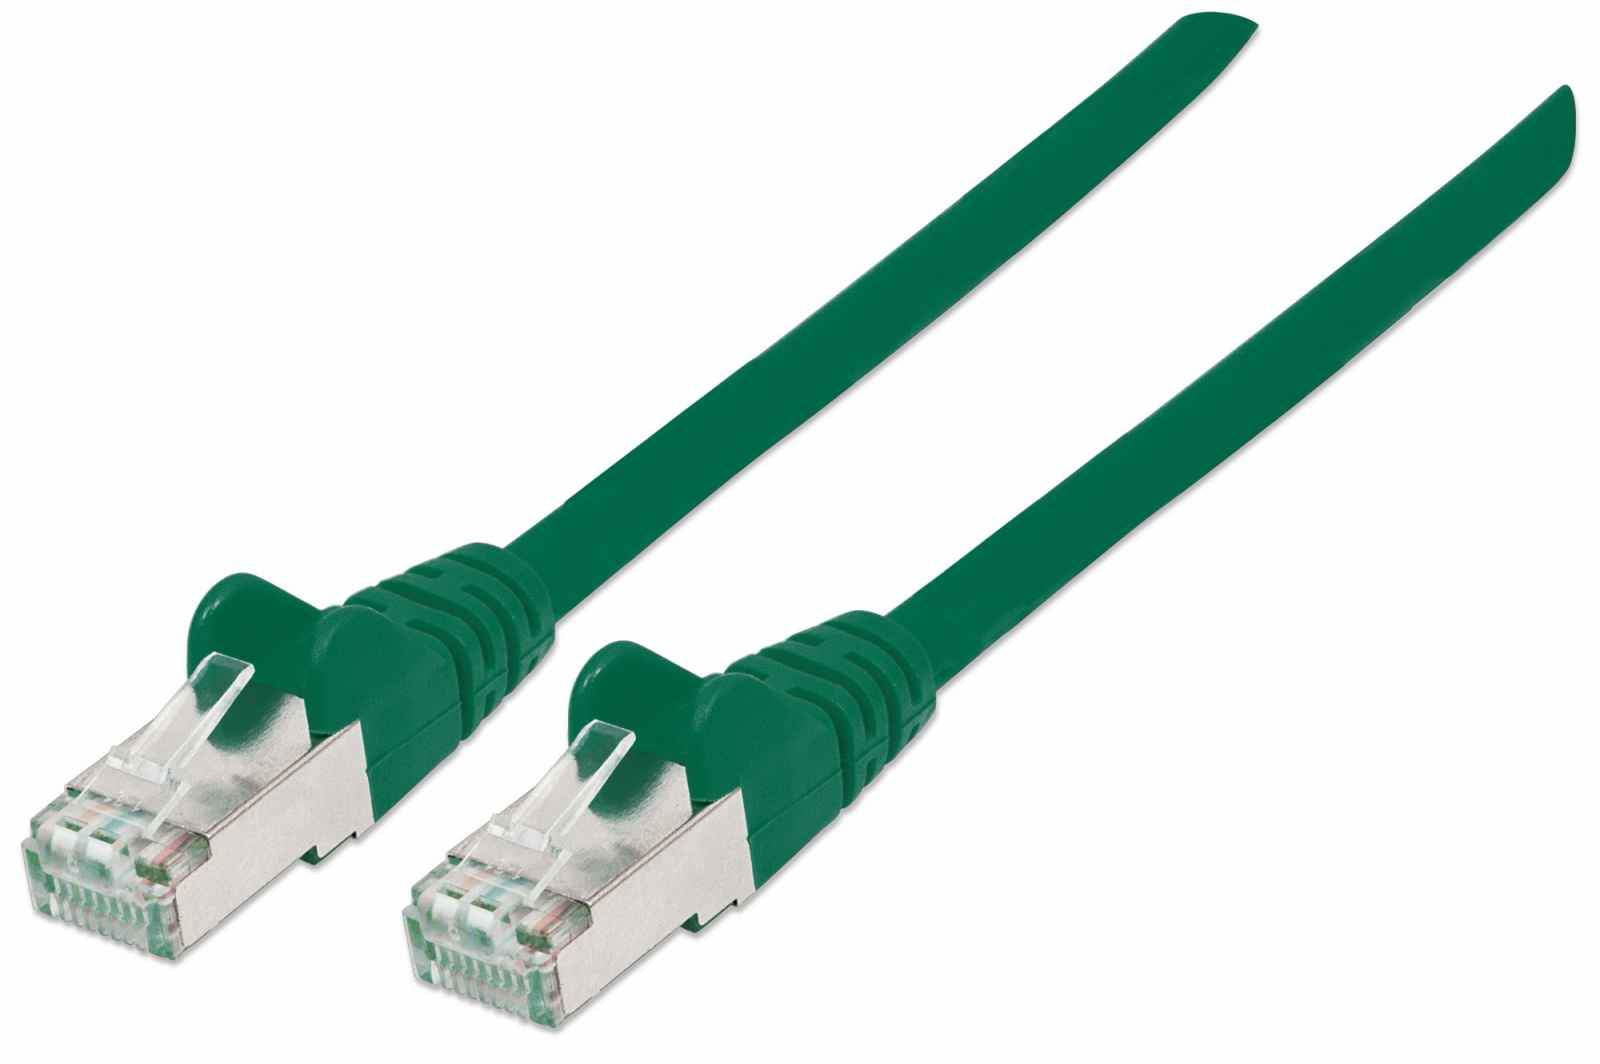 Intellinet Network Patch Cable, Cat7 Cable/Cat6A Plugs, 0.25m, Green, Copper, S/FTP, LSOH / LSZH, PVC, RJ45, Gold Plated Contacts, Snagless, Booted, Lifetime Warranty, Polybag